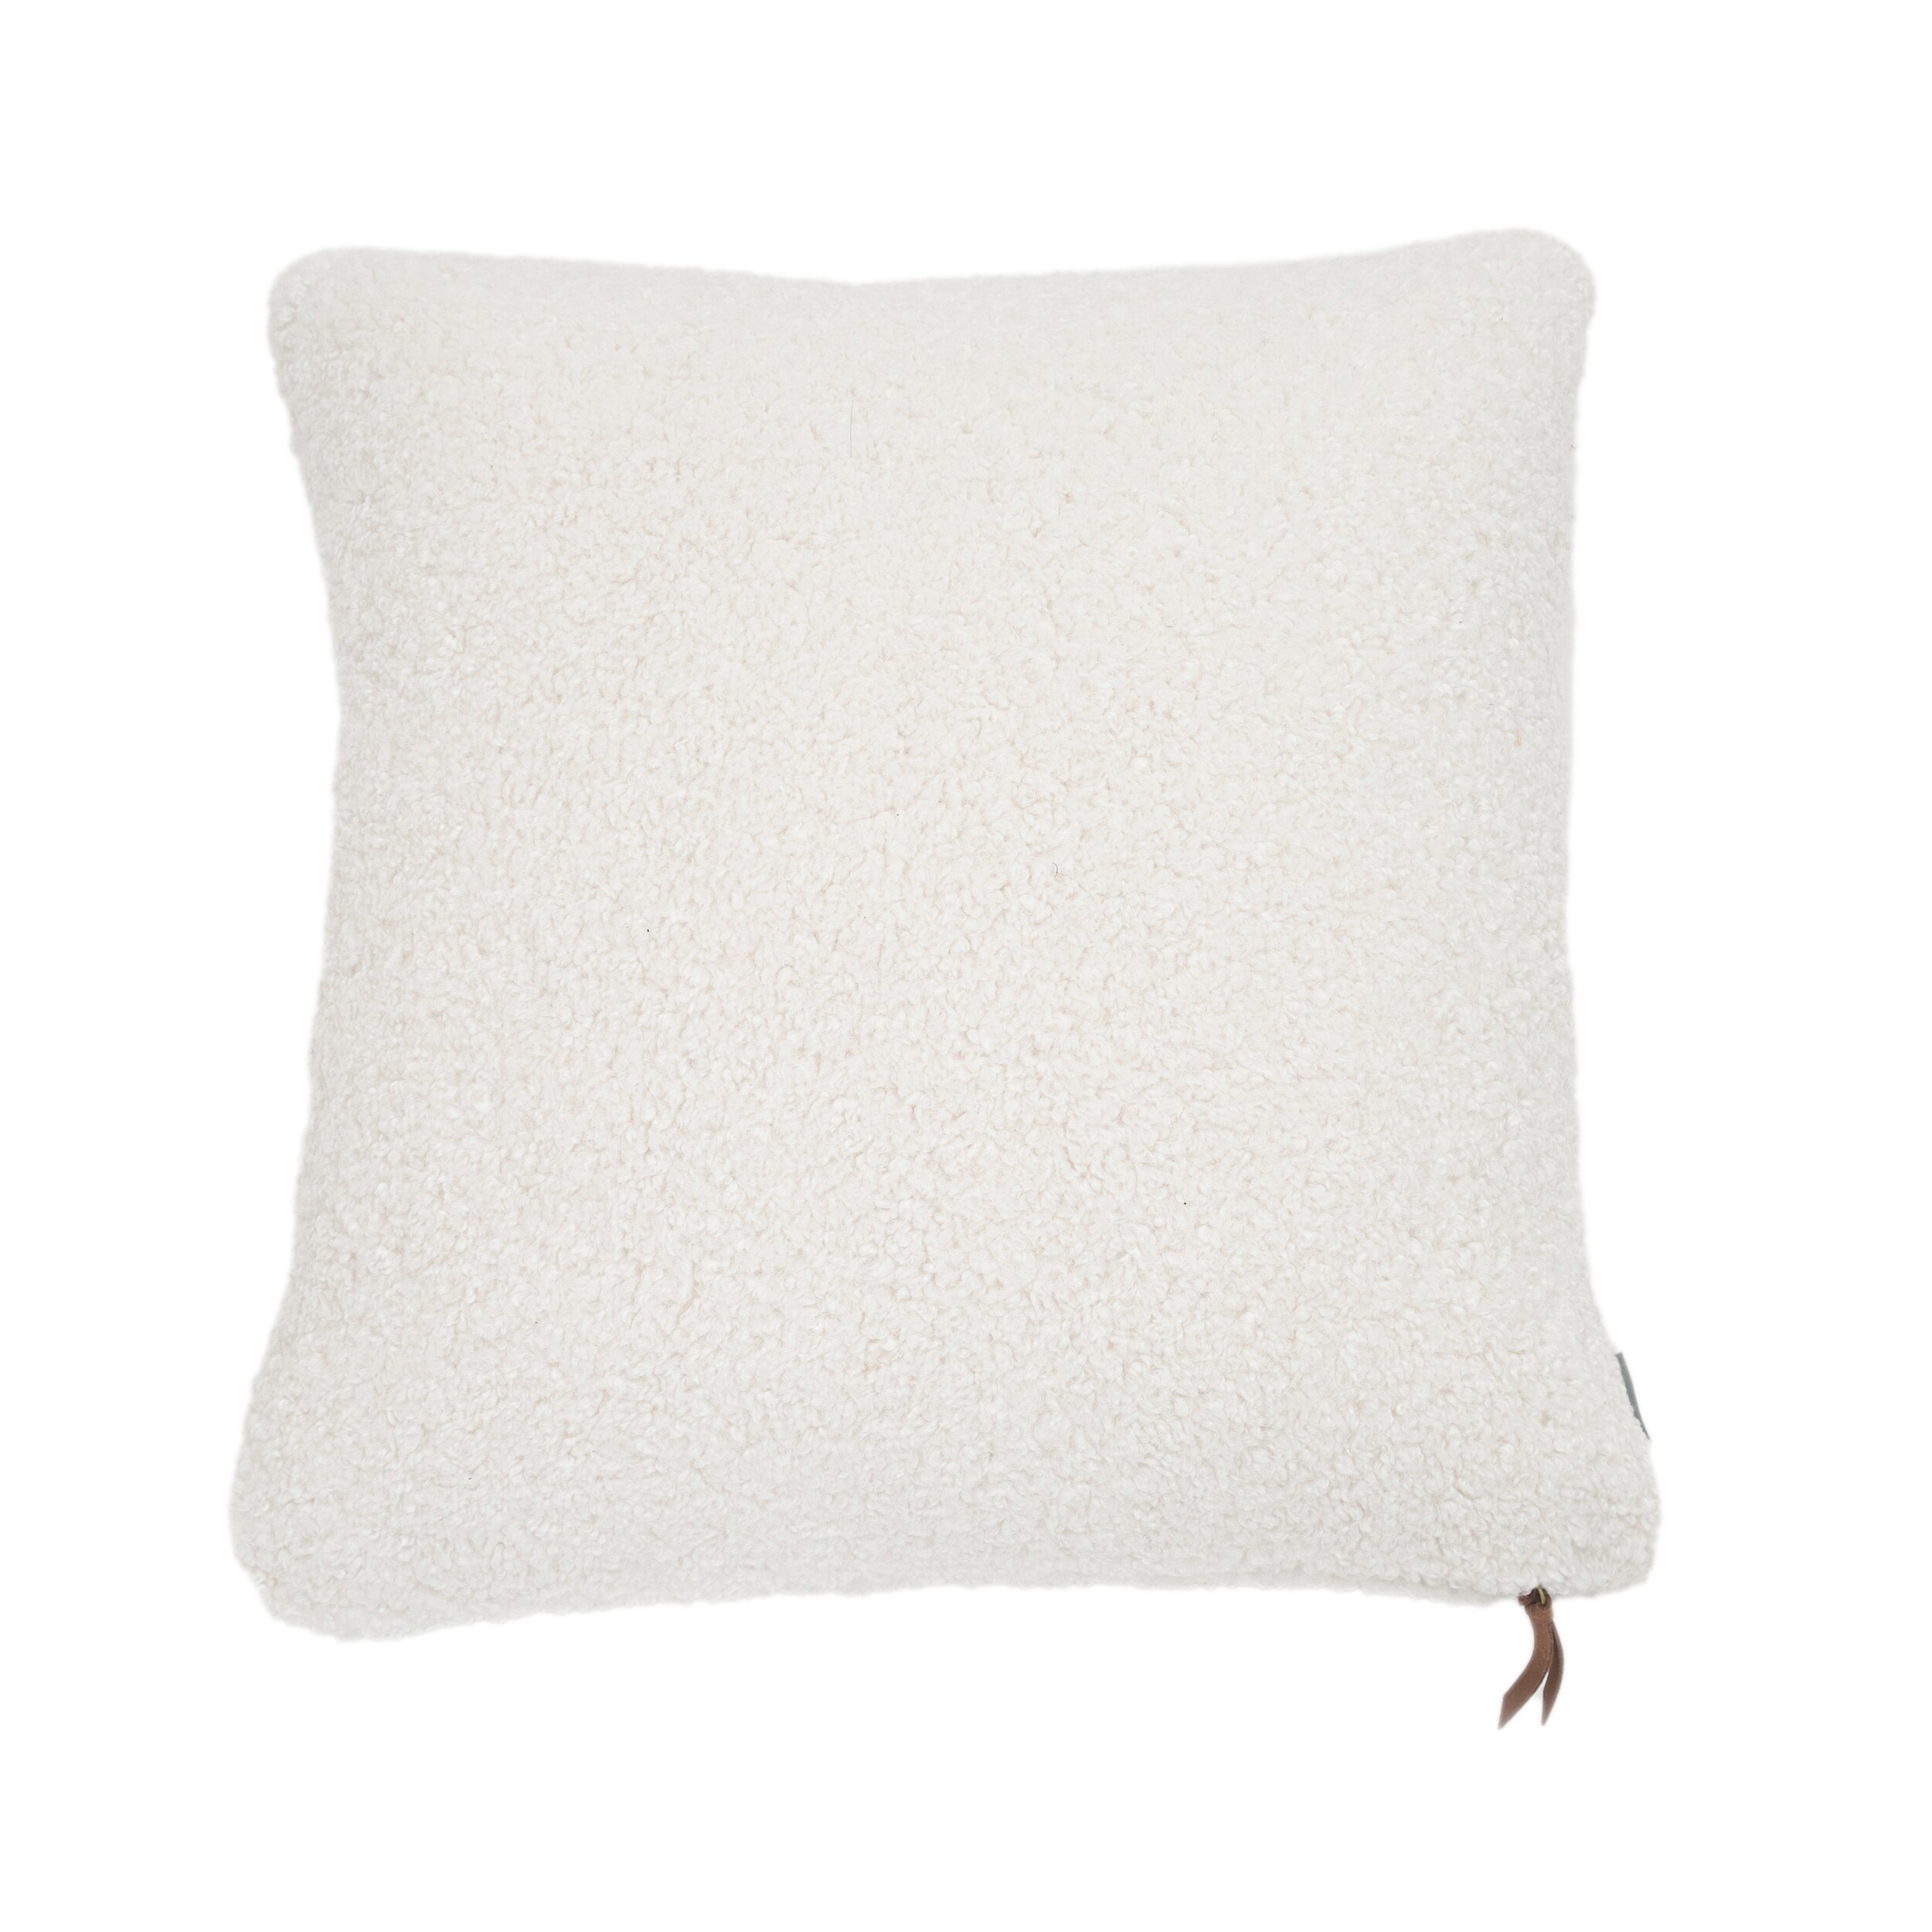 Better Homes & Gardens Sherpa Square Throw Pillow, 20 inch x 20 inch, Light Gray, Pack of 1